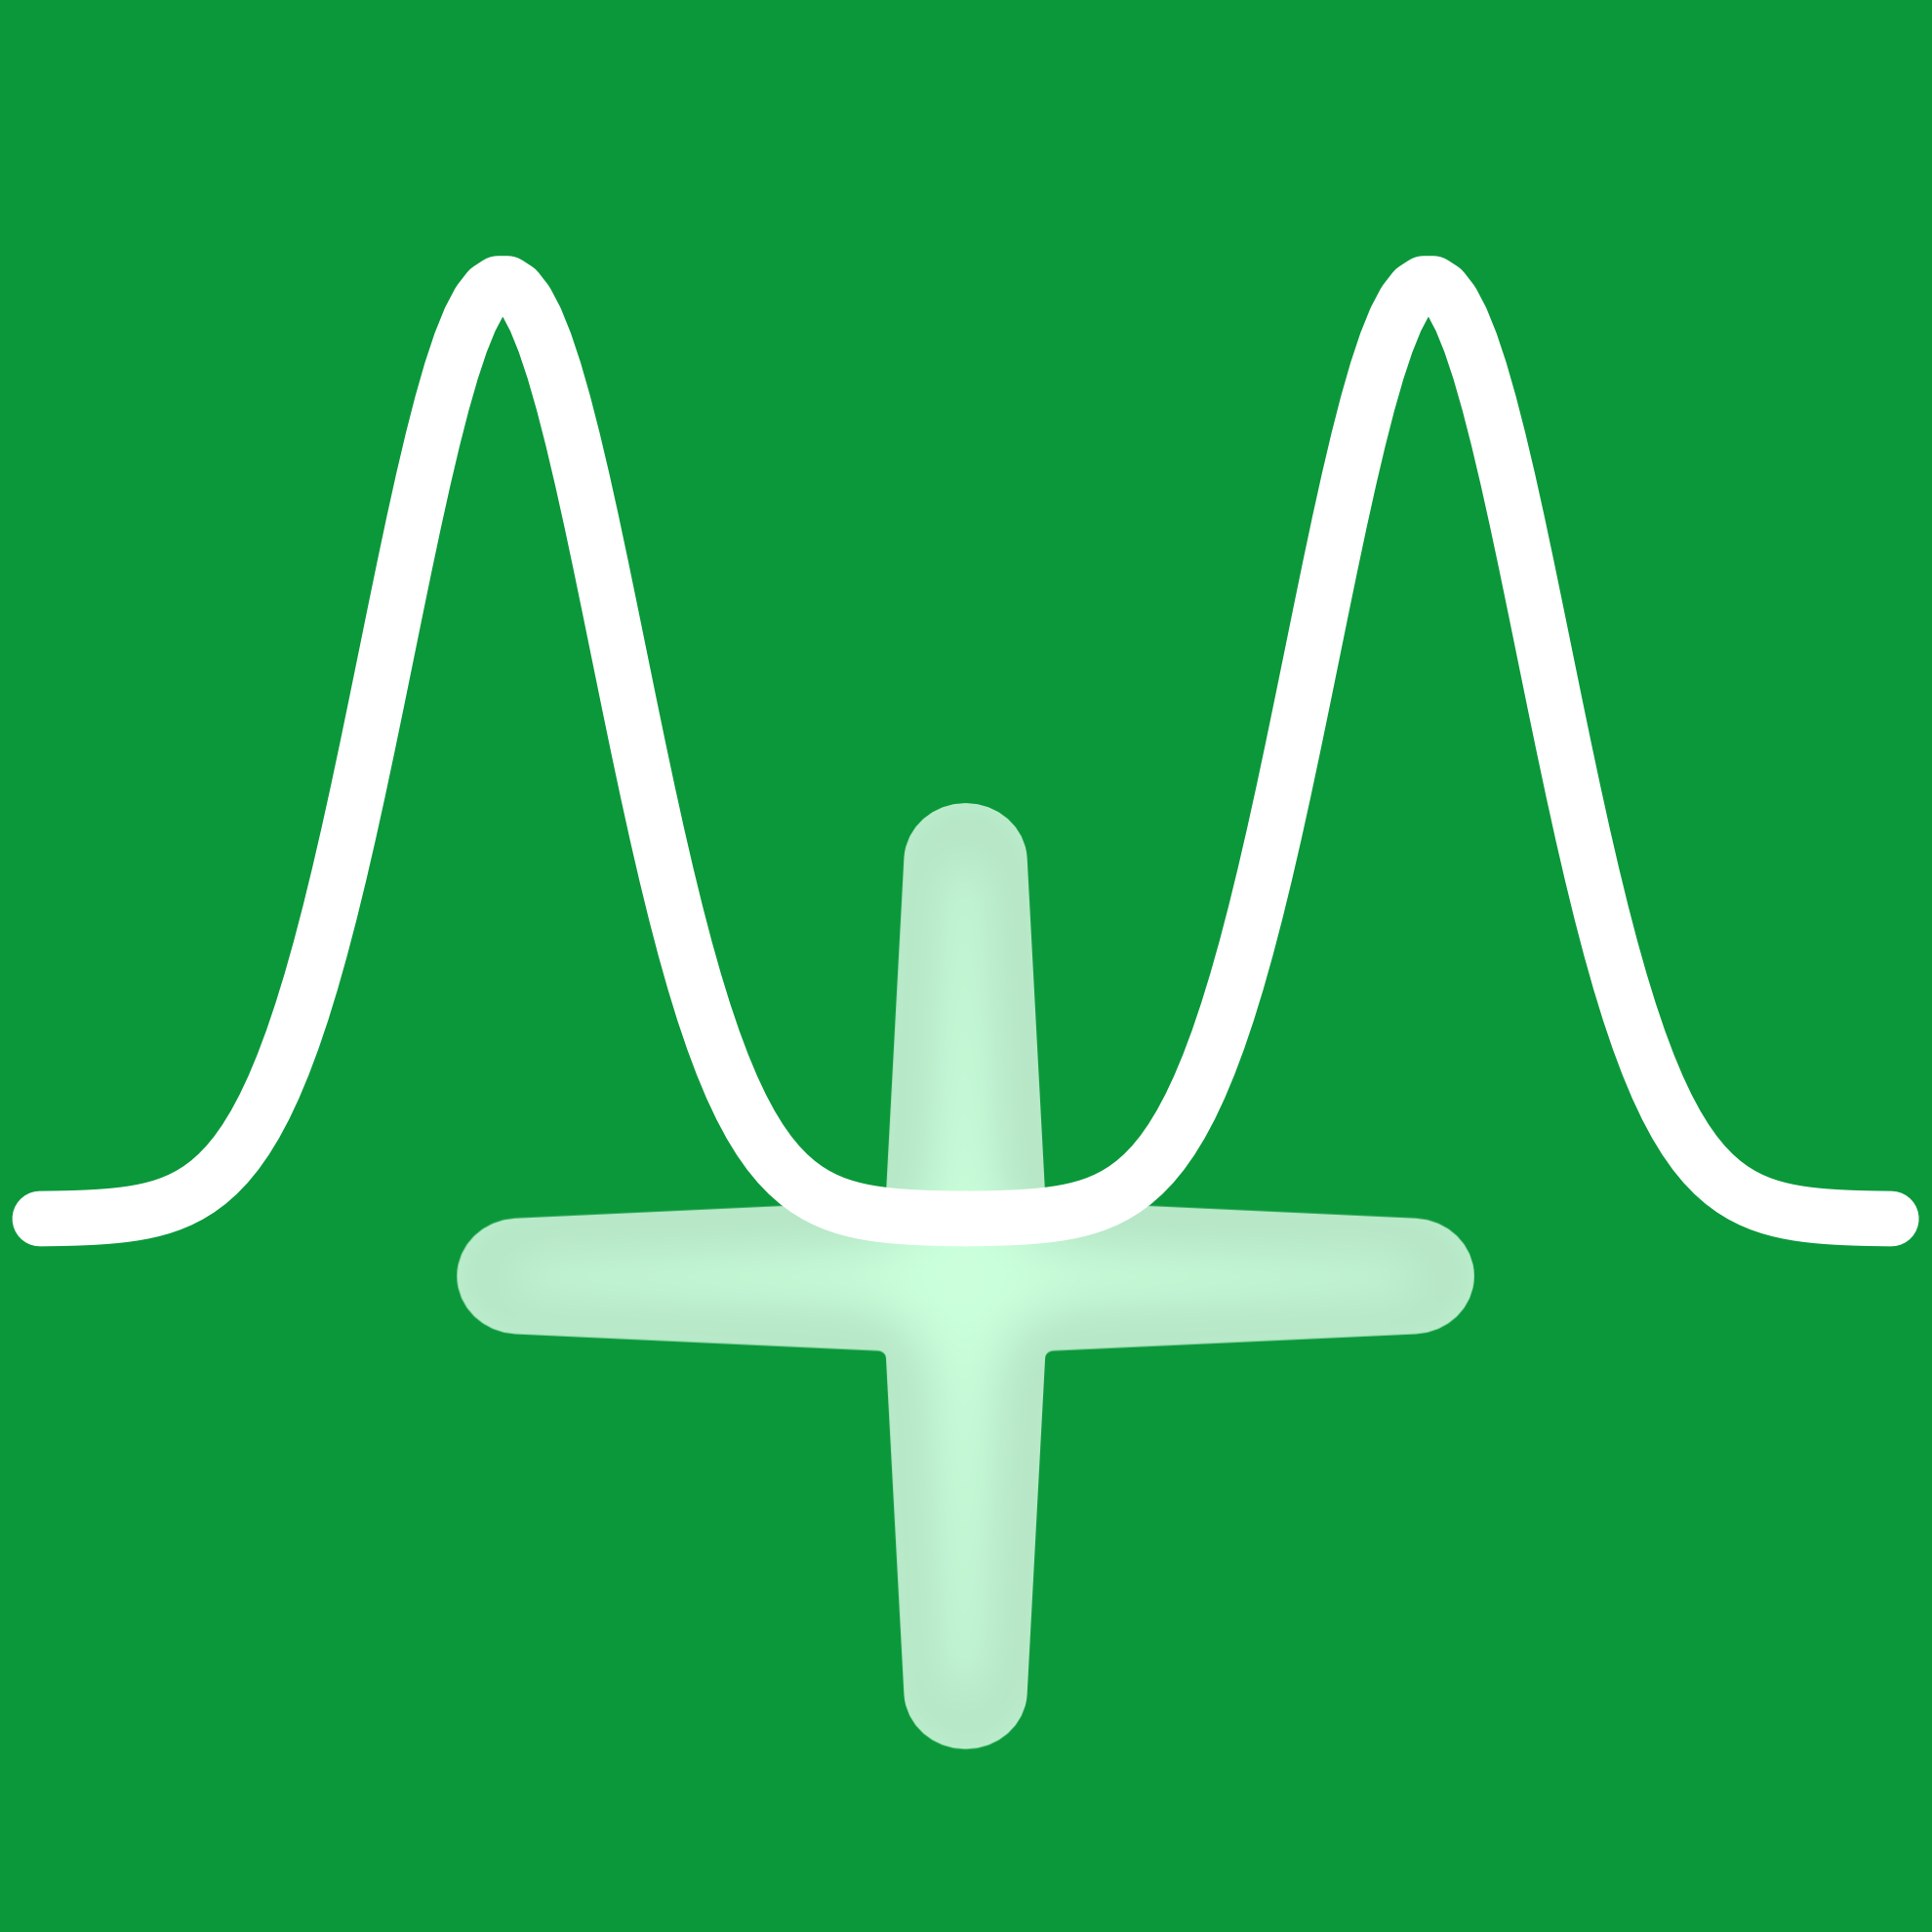 Line spread function test icon